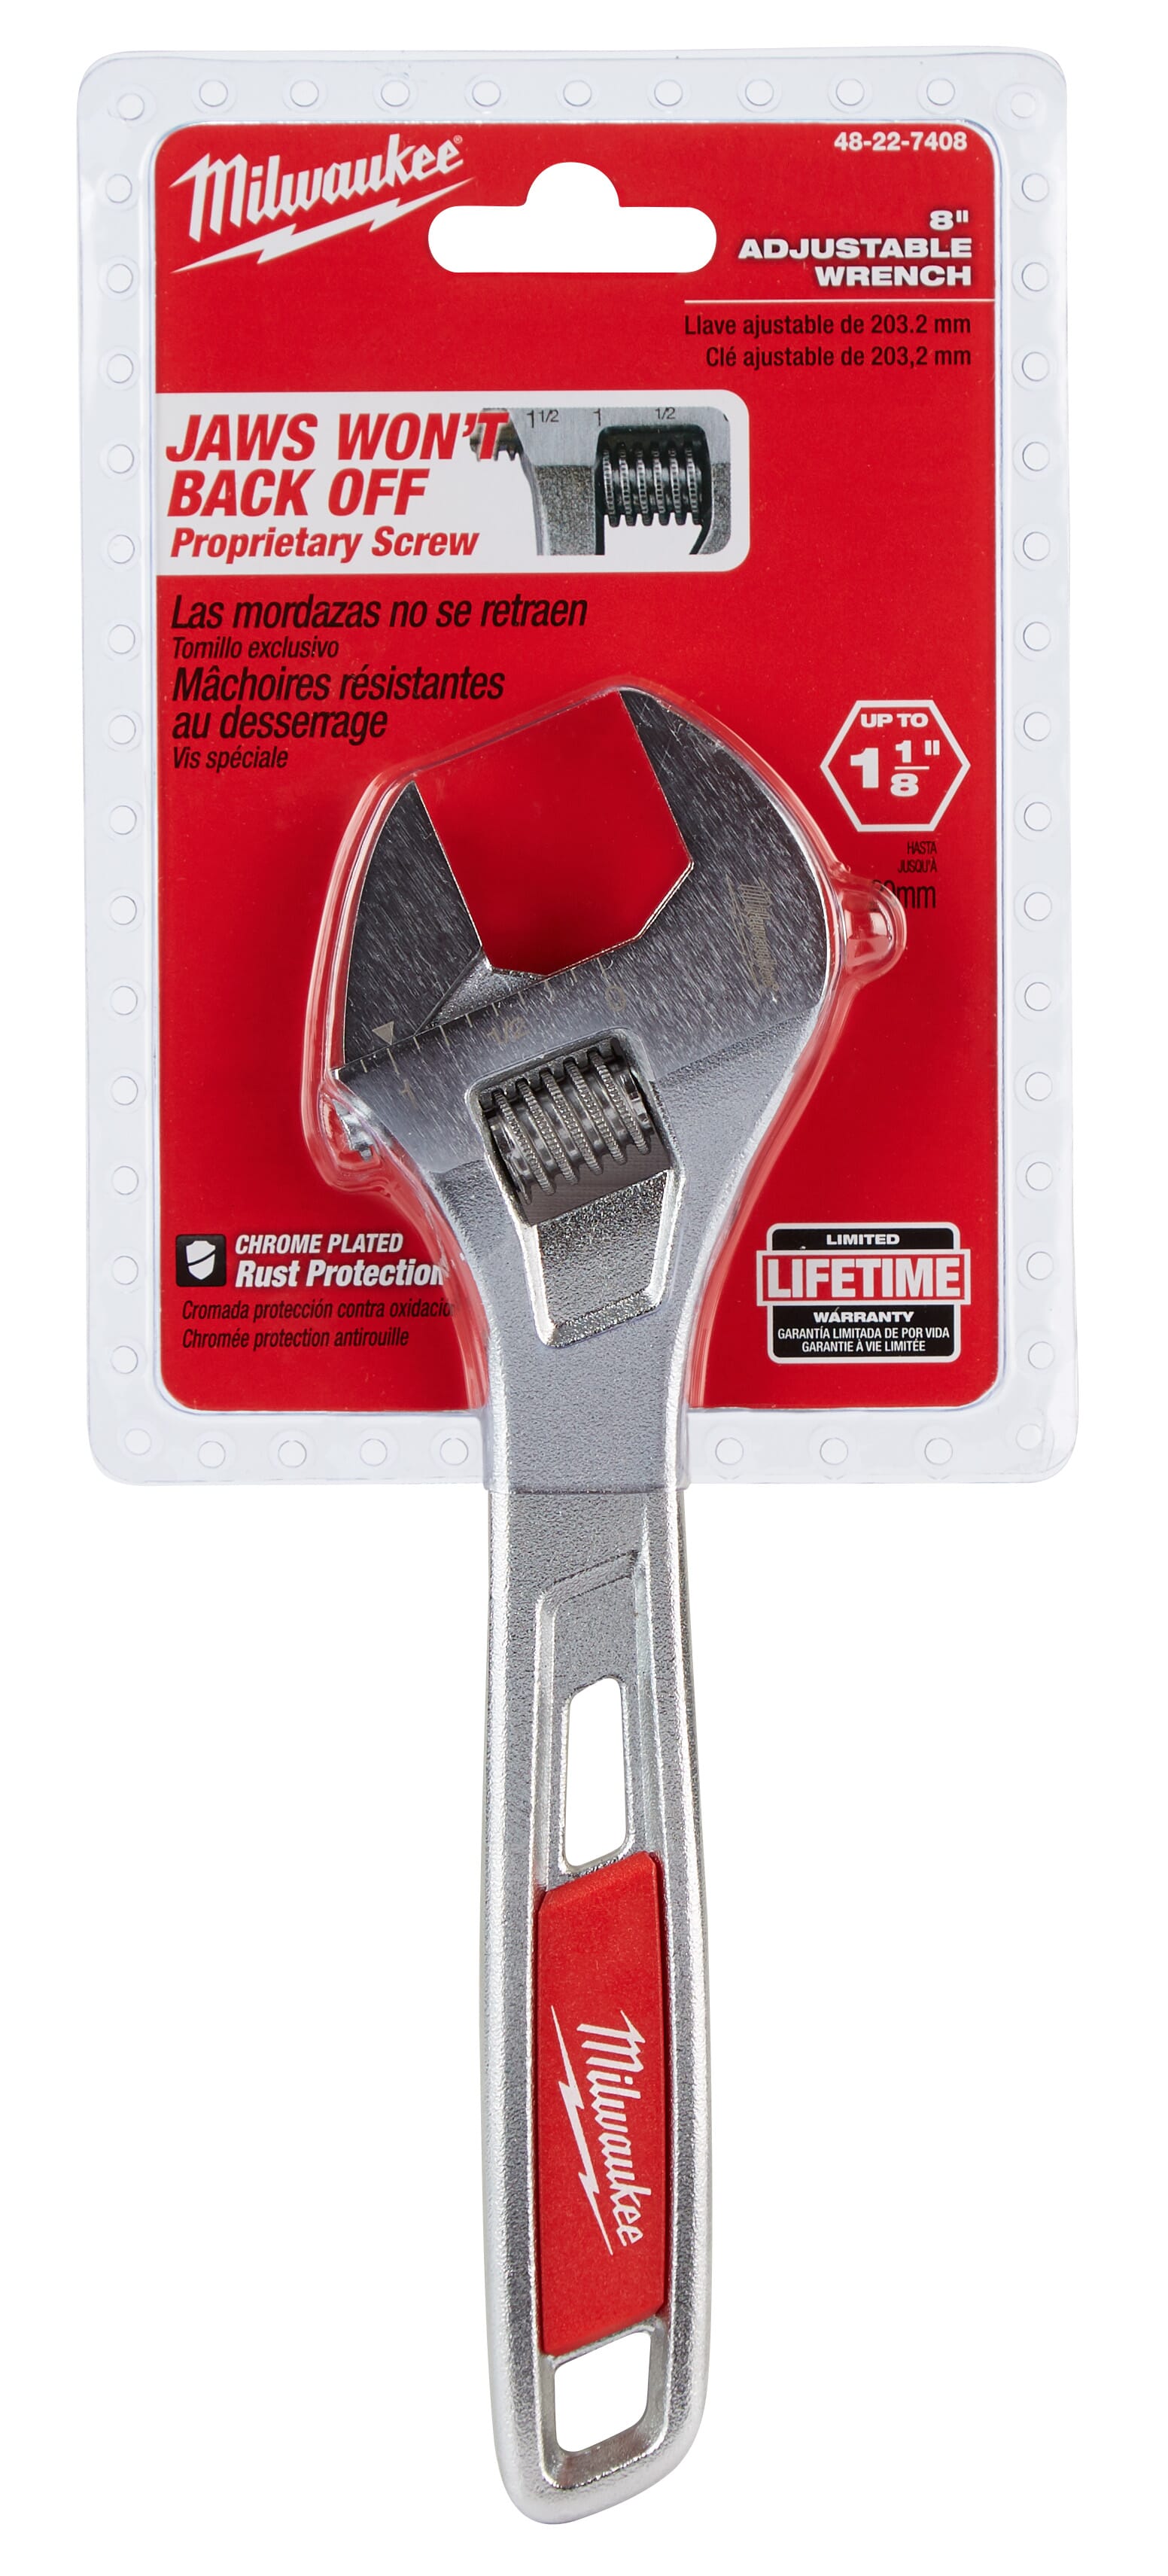 Milwaukee® 48-22-7408 Uninsulated Adjustable Wrench, 1-1/8 in, Polished Chrome, 8 in OAL, Steel Body, ASME Specified, Steel